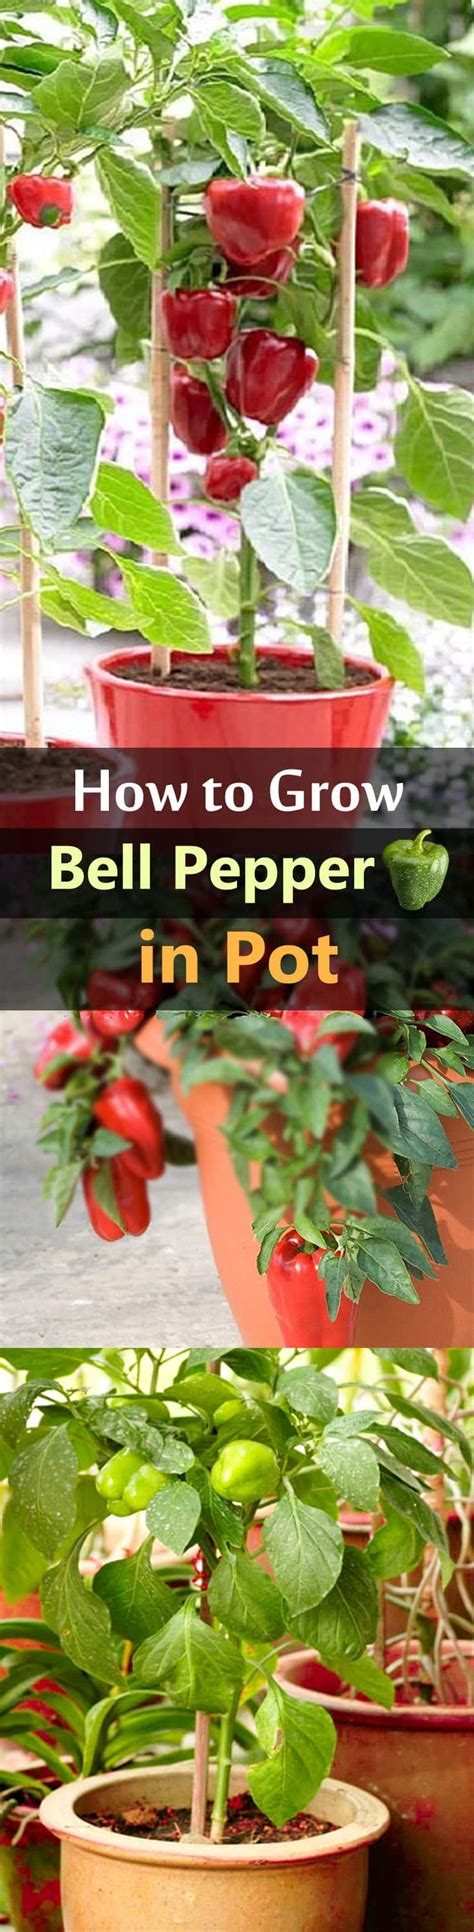 growing bell peppers  pots   grow bell peppers  containers